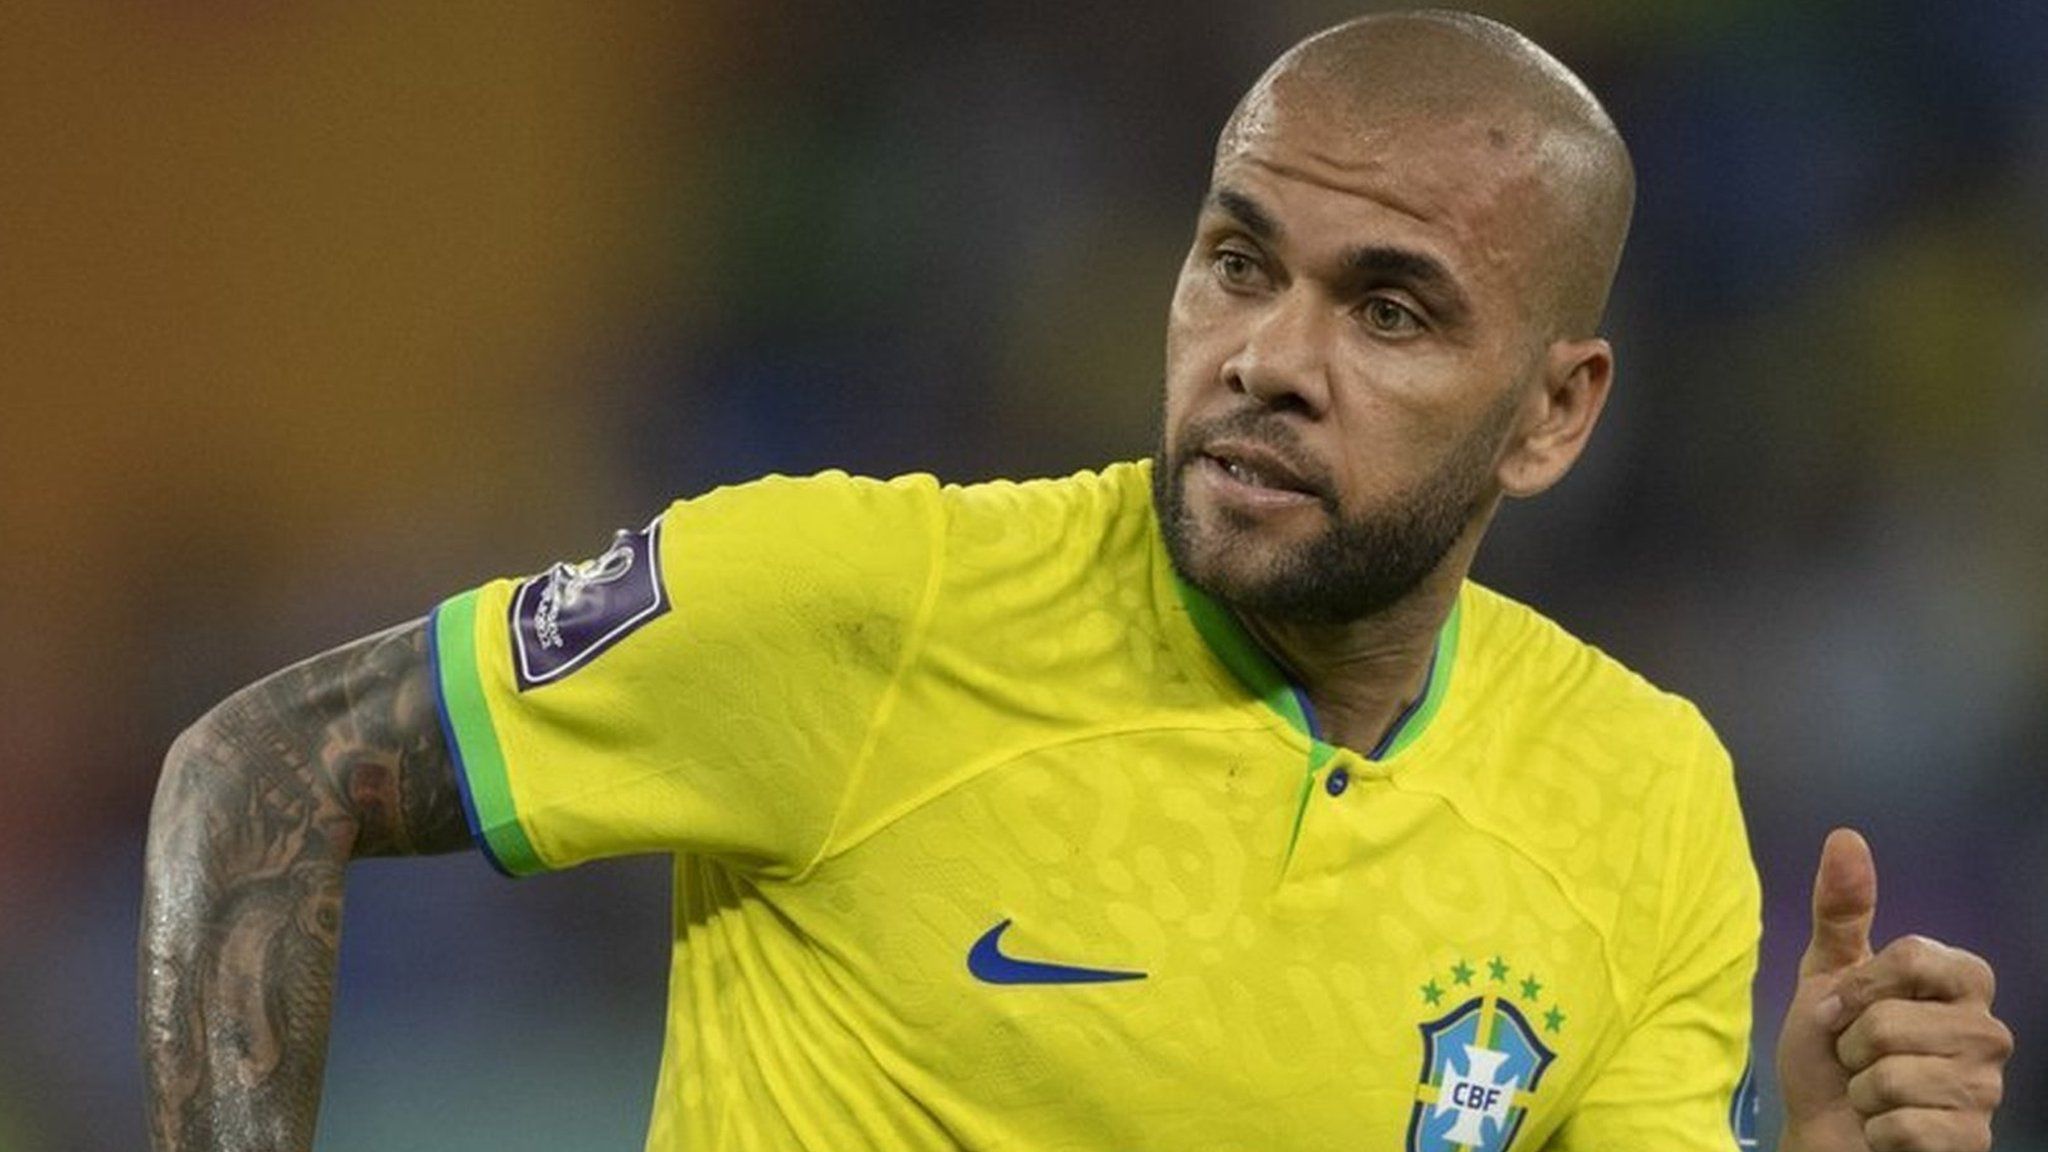 Dani Alves playing for Brazil at the 2022 World Cup